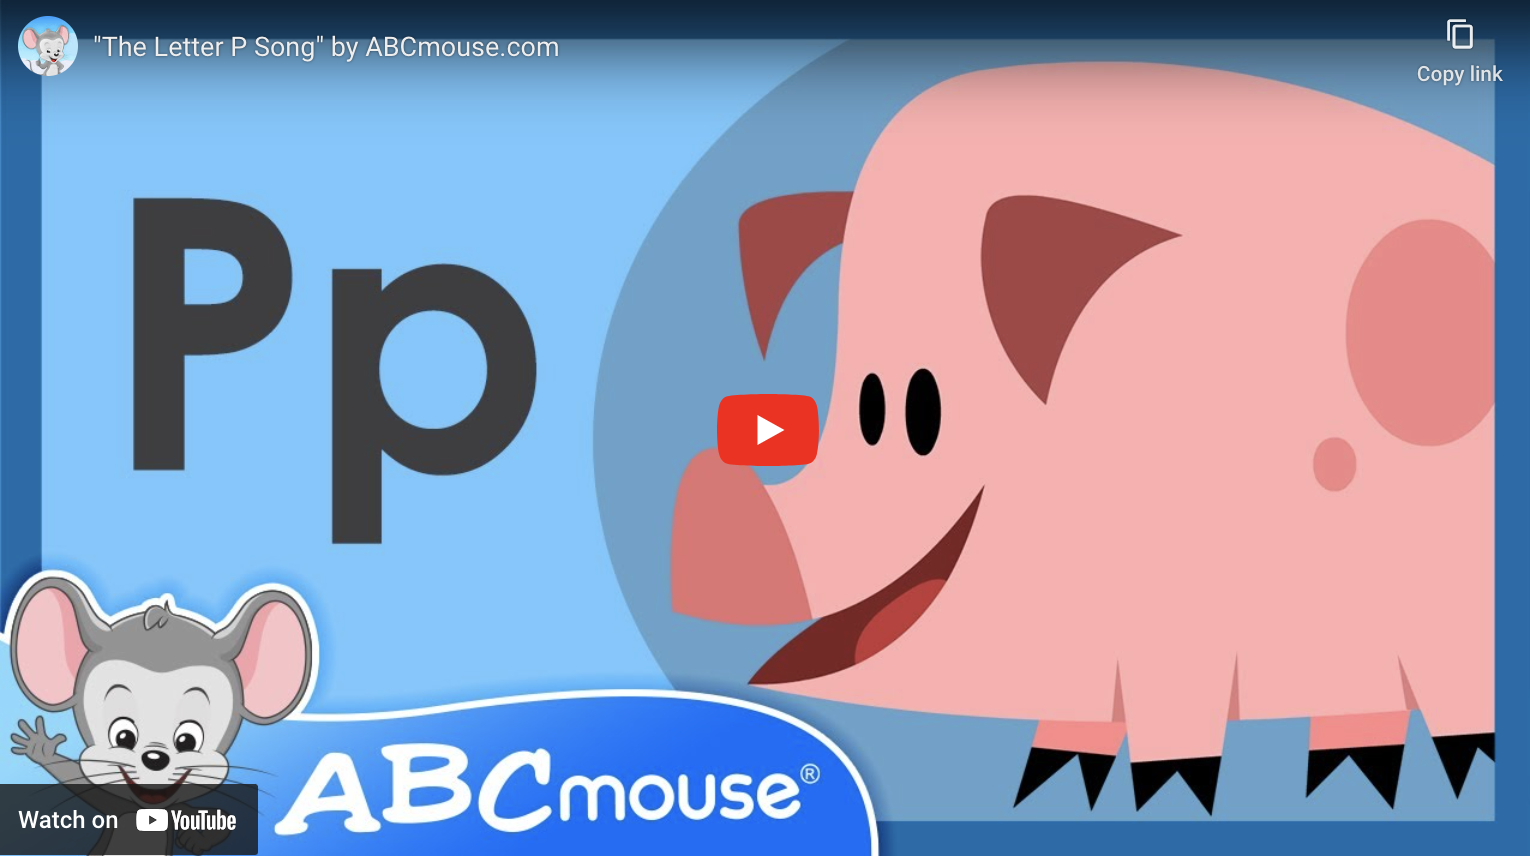 Letter P song from ABCmouse.com. 